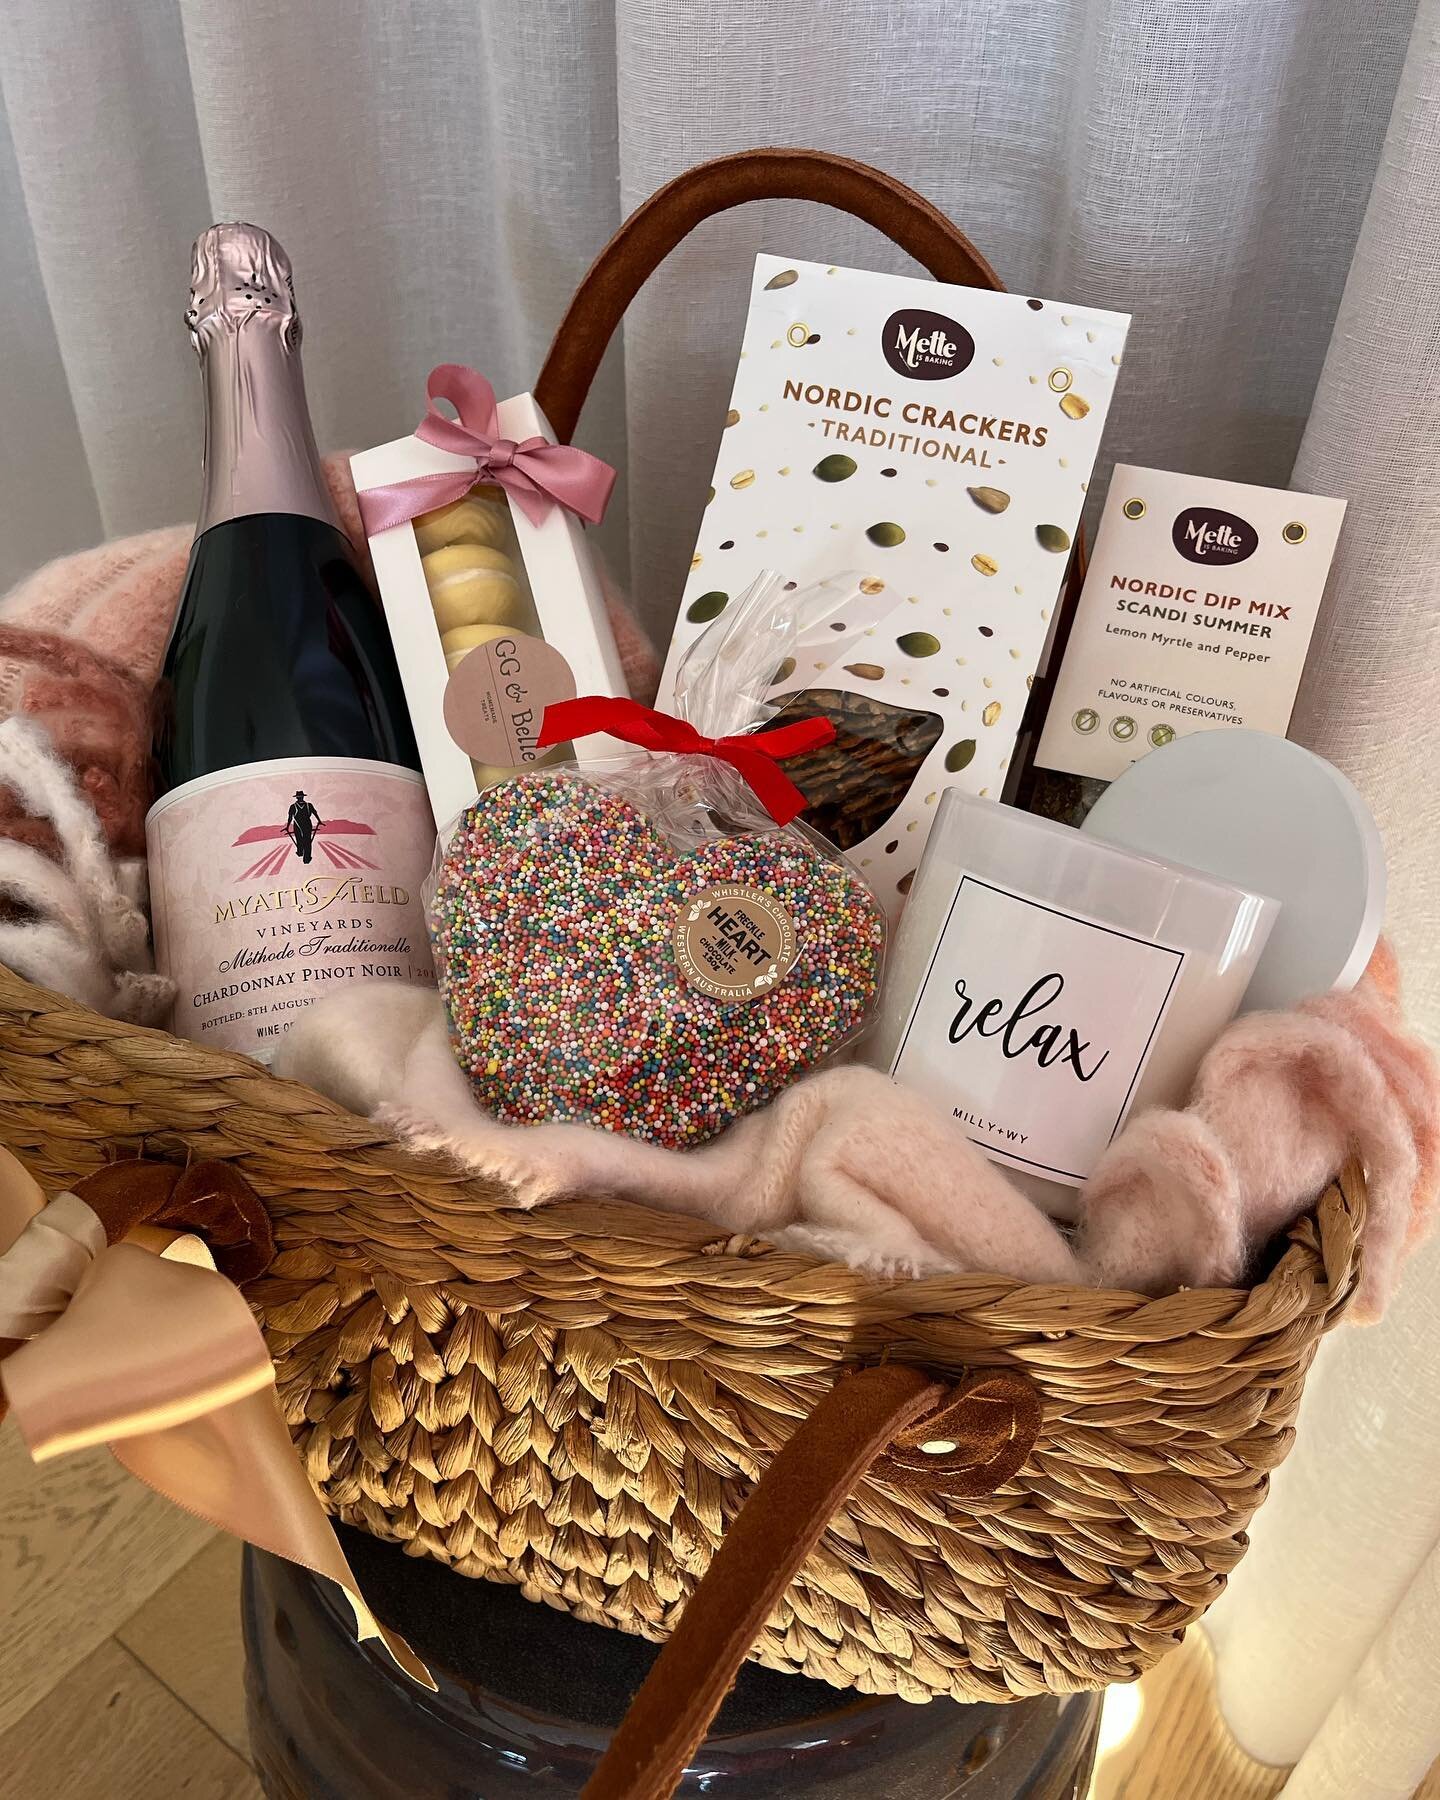 And the winner is&hellip;. 

Drumroll please&hellip; 
🥁🥁🥁

On Instagram it&rsquo;s 
@heidijanegold 
We have been in touch with the lucky winner to arrange delivery of the beautiful Mother&rsquo;s Day basket 🧺 just in time for the weekend.

Thanks